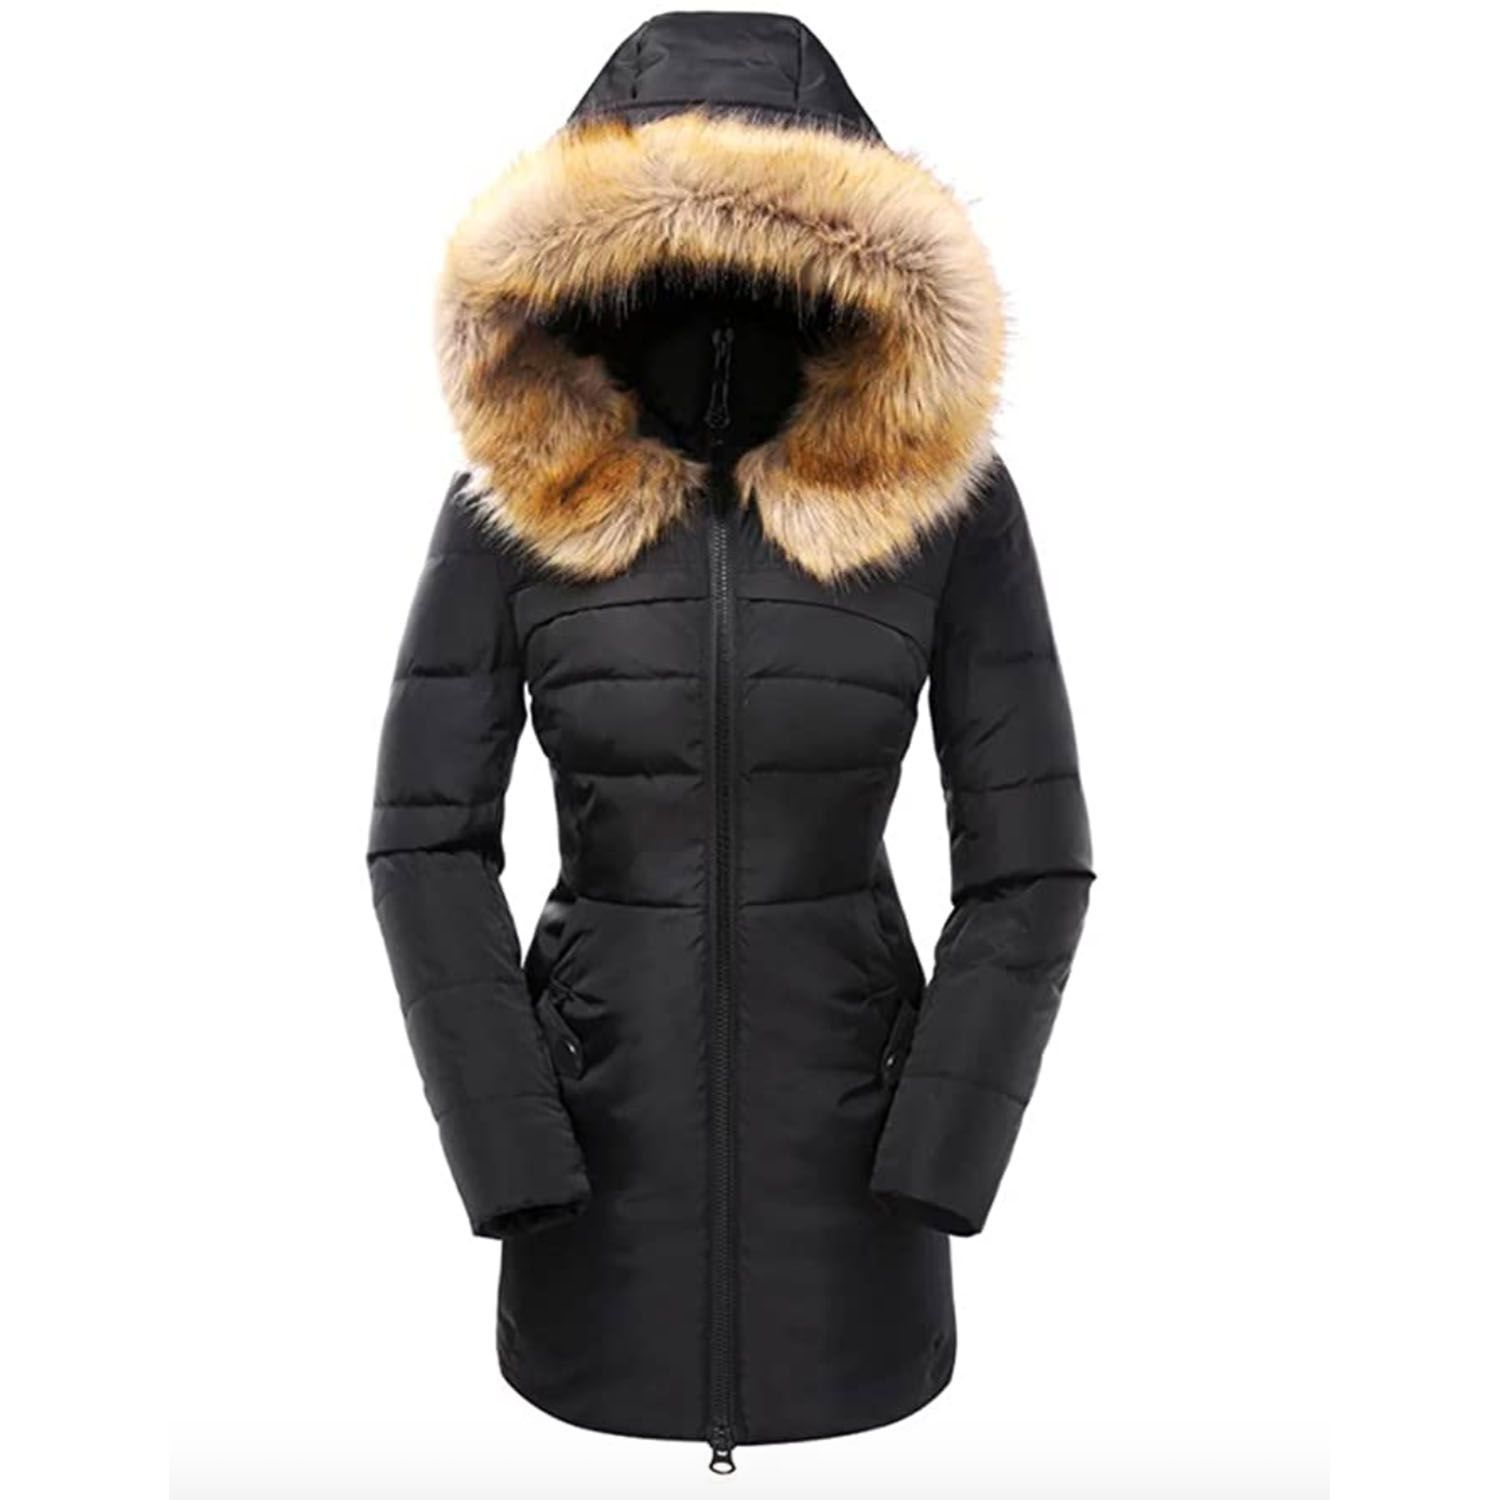 RIJING Women's Winter Thicken Puffer Coat Warm Padded Windproof Packable Mid-Long Parka Jacket with Fur Hood